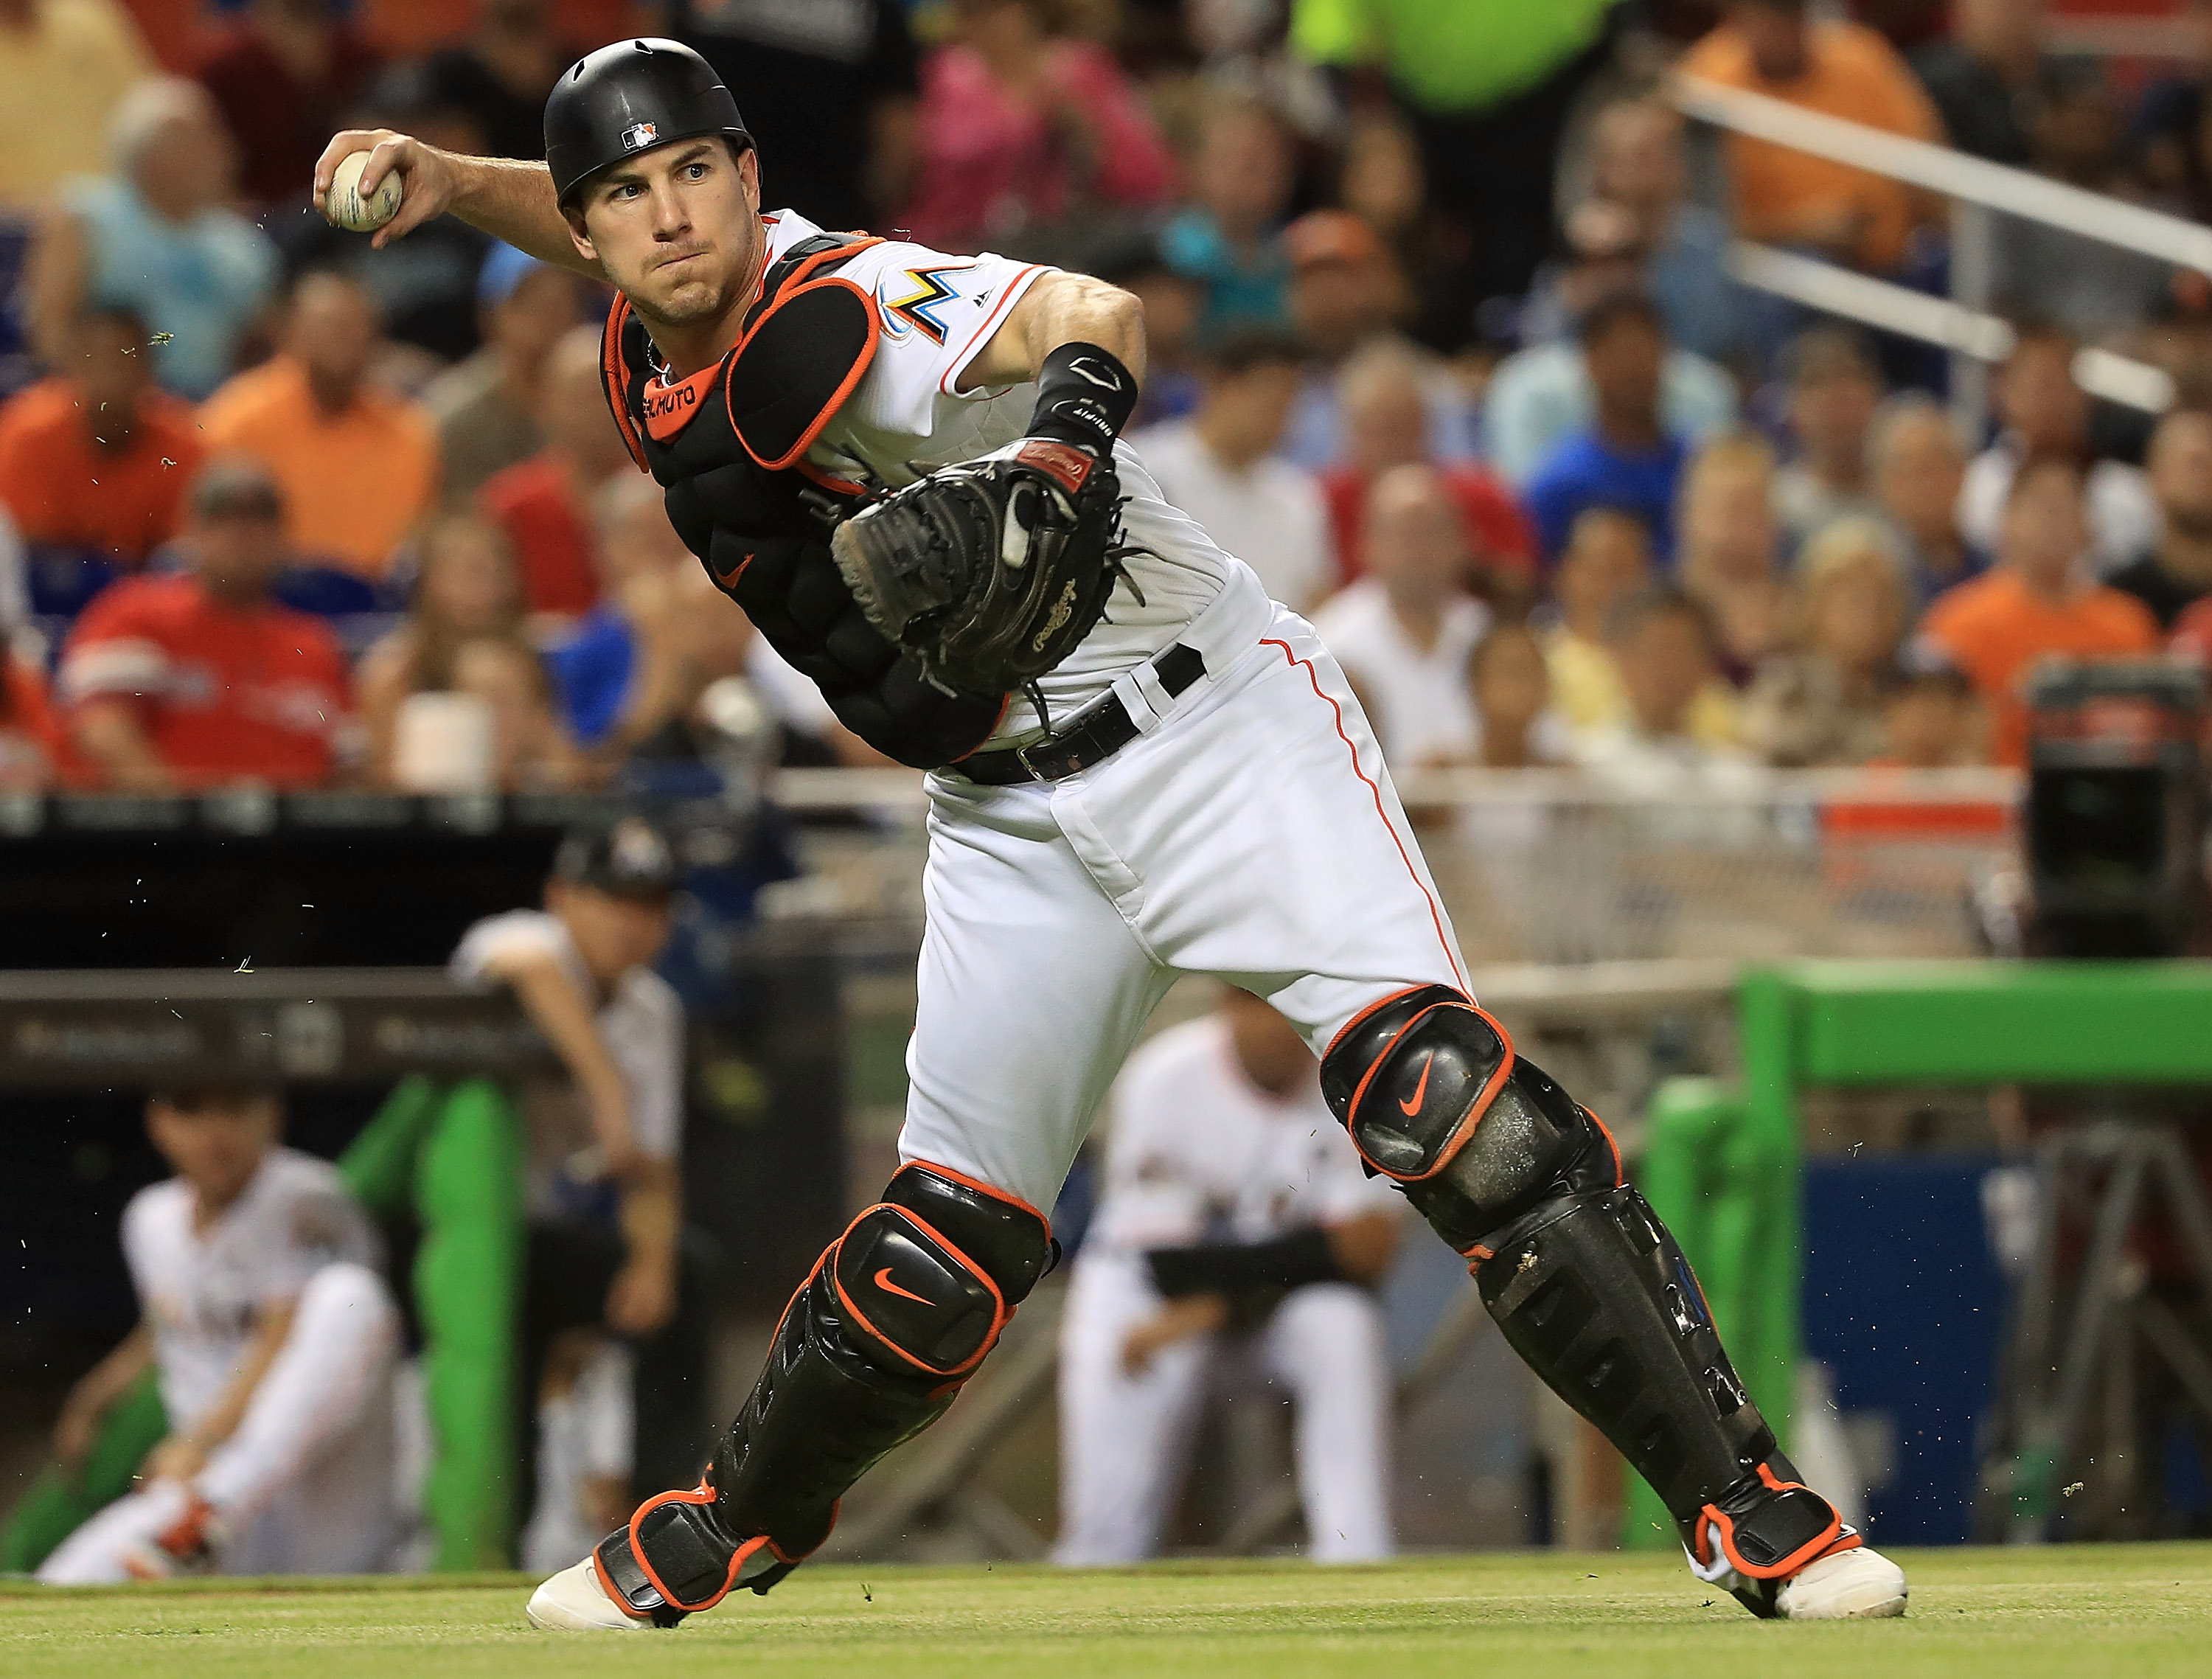 2018 MLB All-Star Game: Marlins catcher J.T. Realmuto makes NL roster -  Fish Stripes